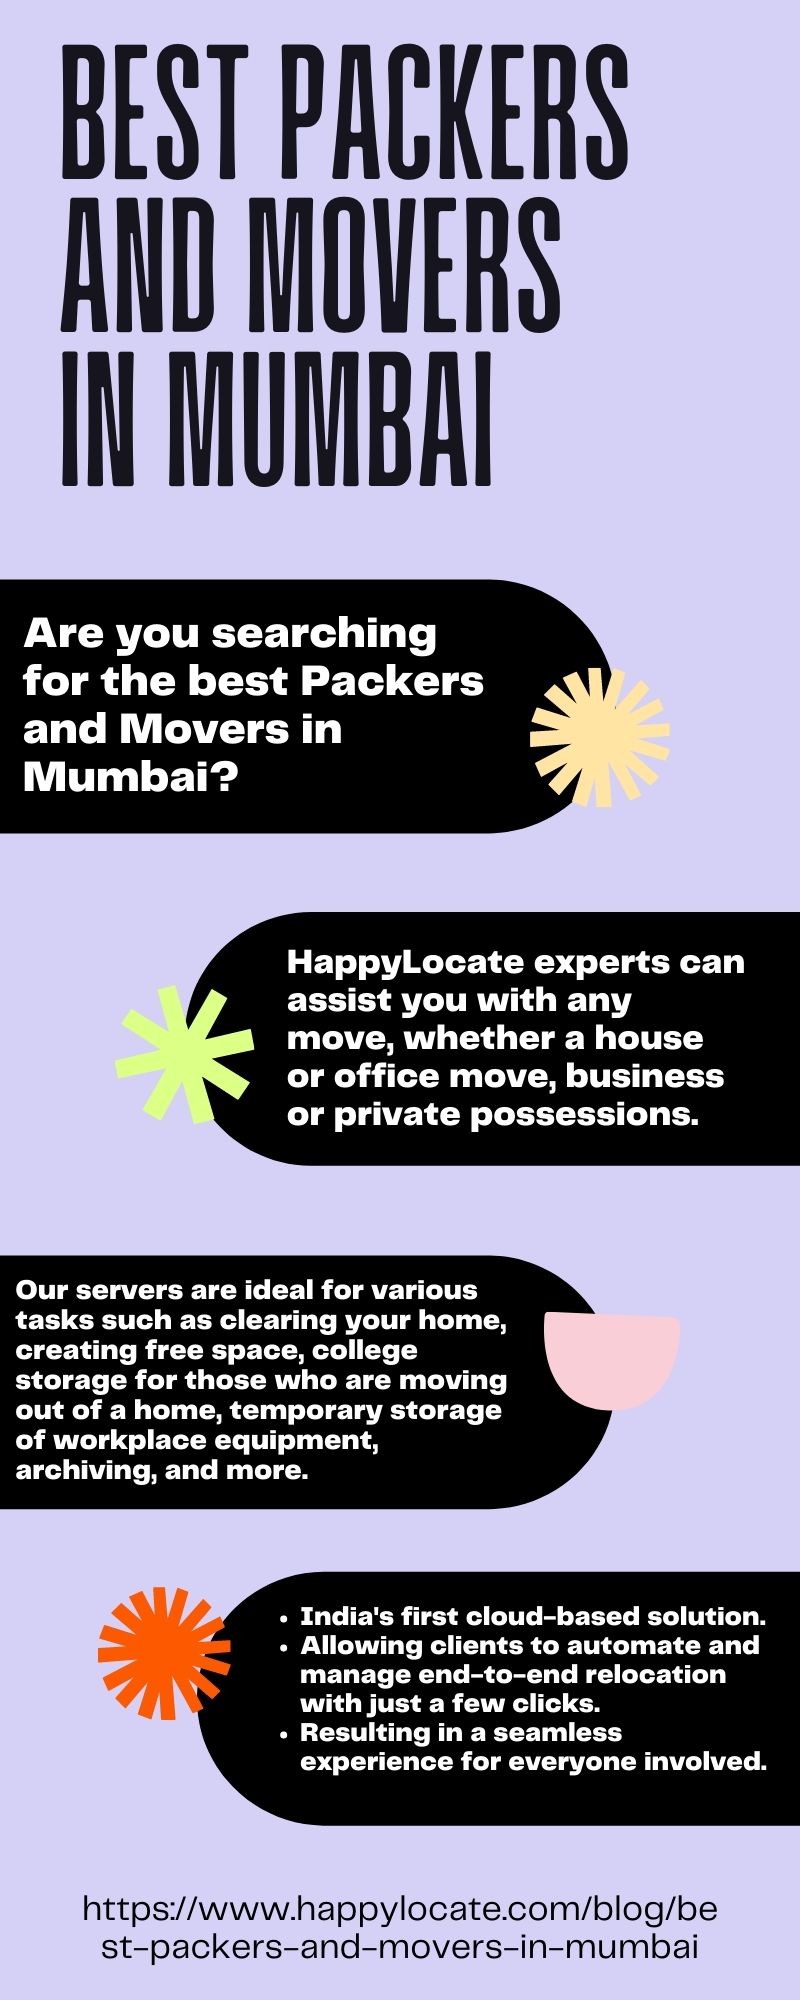 BEST PACKERS
AND MOVERS
IN MUMBA

Are you searching
for the best Packers
and Movers in
Mumbai?

HappylLocate experts can
assist you with any
move, whether a house
or office move, business
or private possessions.

Our servers are ideal for various
tasks such as clearing your home,
creating free space, college
storage for those who are moving
out of a home, temporary storage
of workplace equipment,
archiving, and more.

 

 
  

« India's first cloud-based solution.

« Allowing clients to automate and
manage end-to-end relocation
with just a few clicks.

« Resulting in a seamless

experience for everyone involved.

 
  
  

   
 

https//www.happylocate.com/blog/be
st-packers-and-movers-in-mumbai